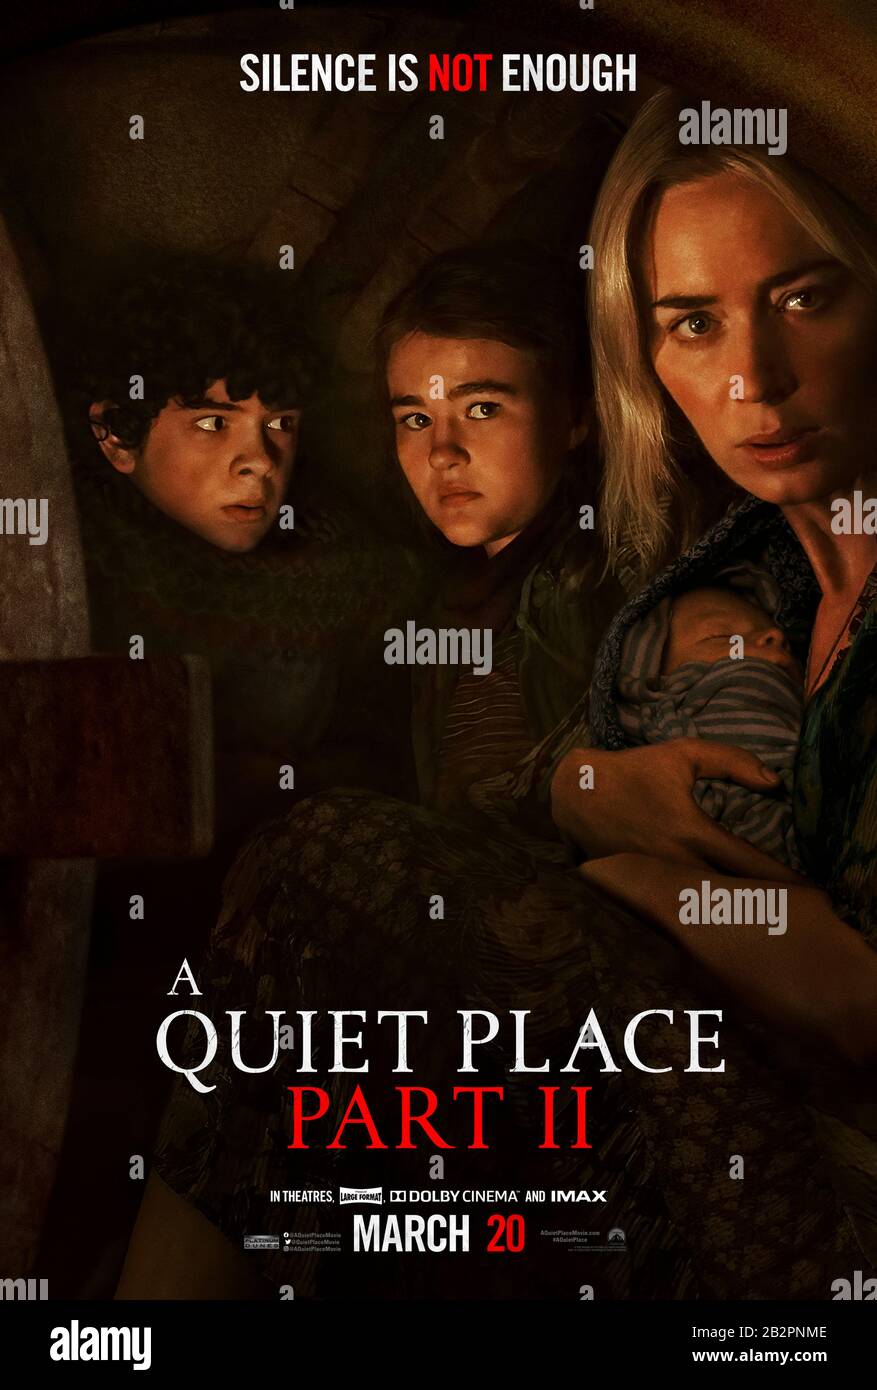 A Quiet Place: Part II (2020) directed by John Krasinski and starring Emily Blunt, Millicent Simmonds and Noah Jupe. Sequel following the Abbott family's journey and the discovery of new dangers. Stock Photo